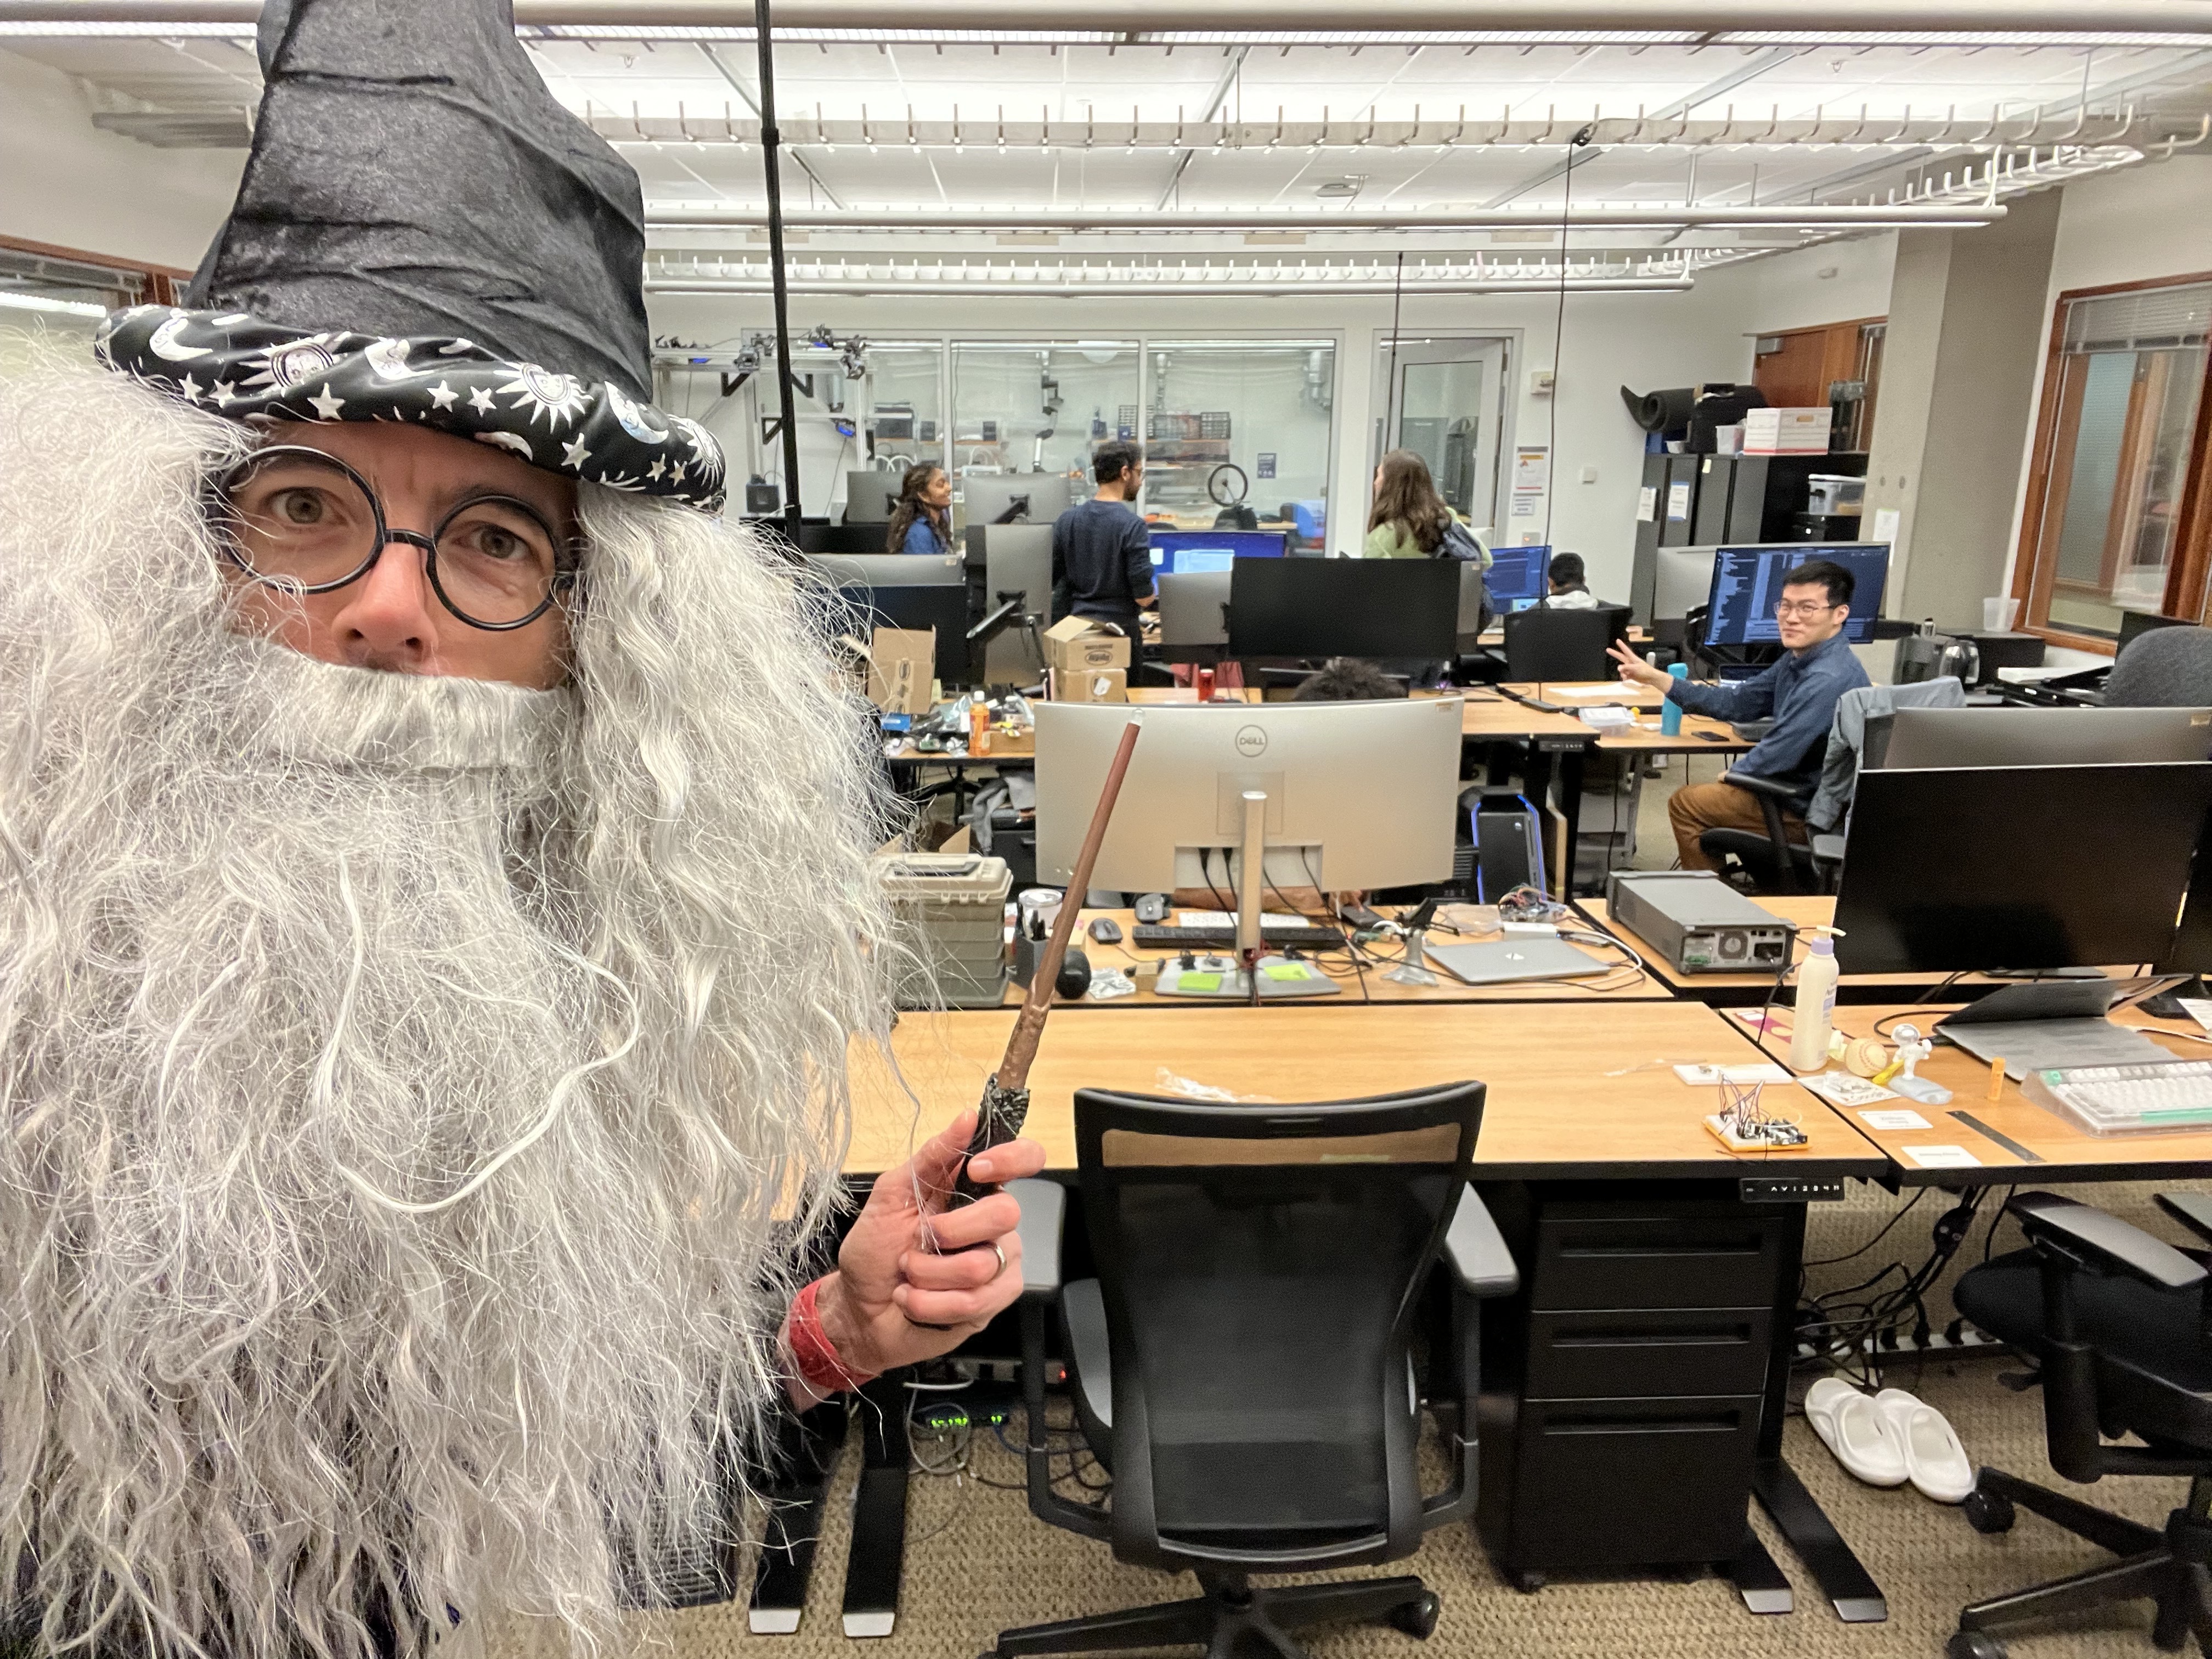 Professor Froehlich dressed up as Dumbledore with a wizard hat, hair, and beard. He is holding a wand.